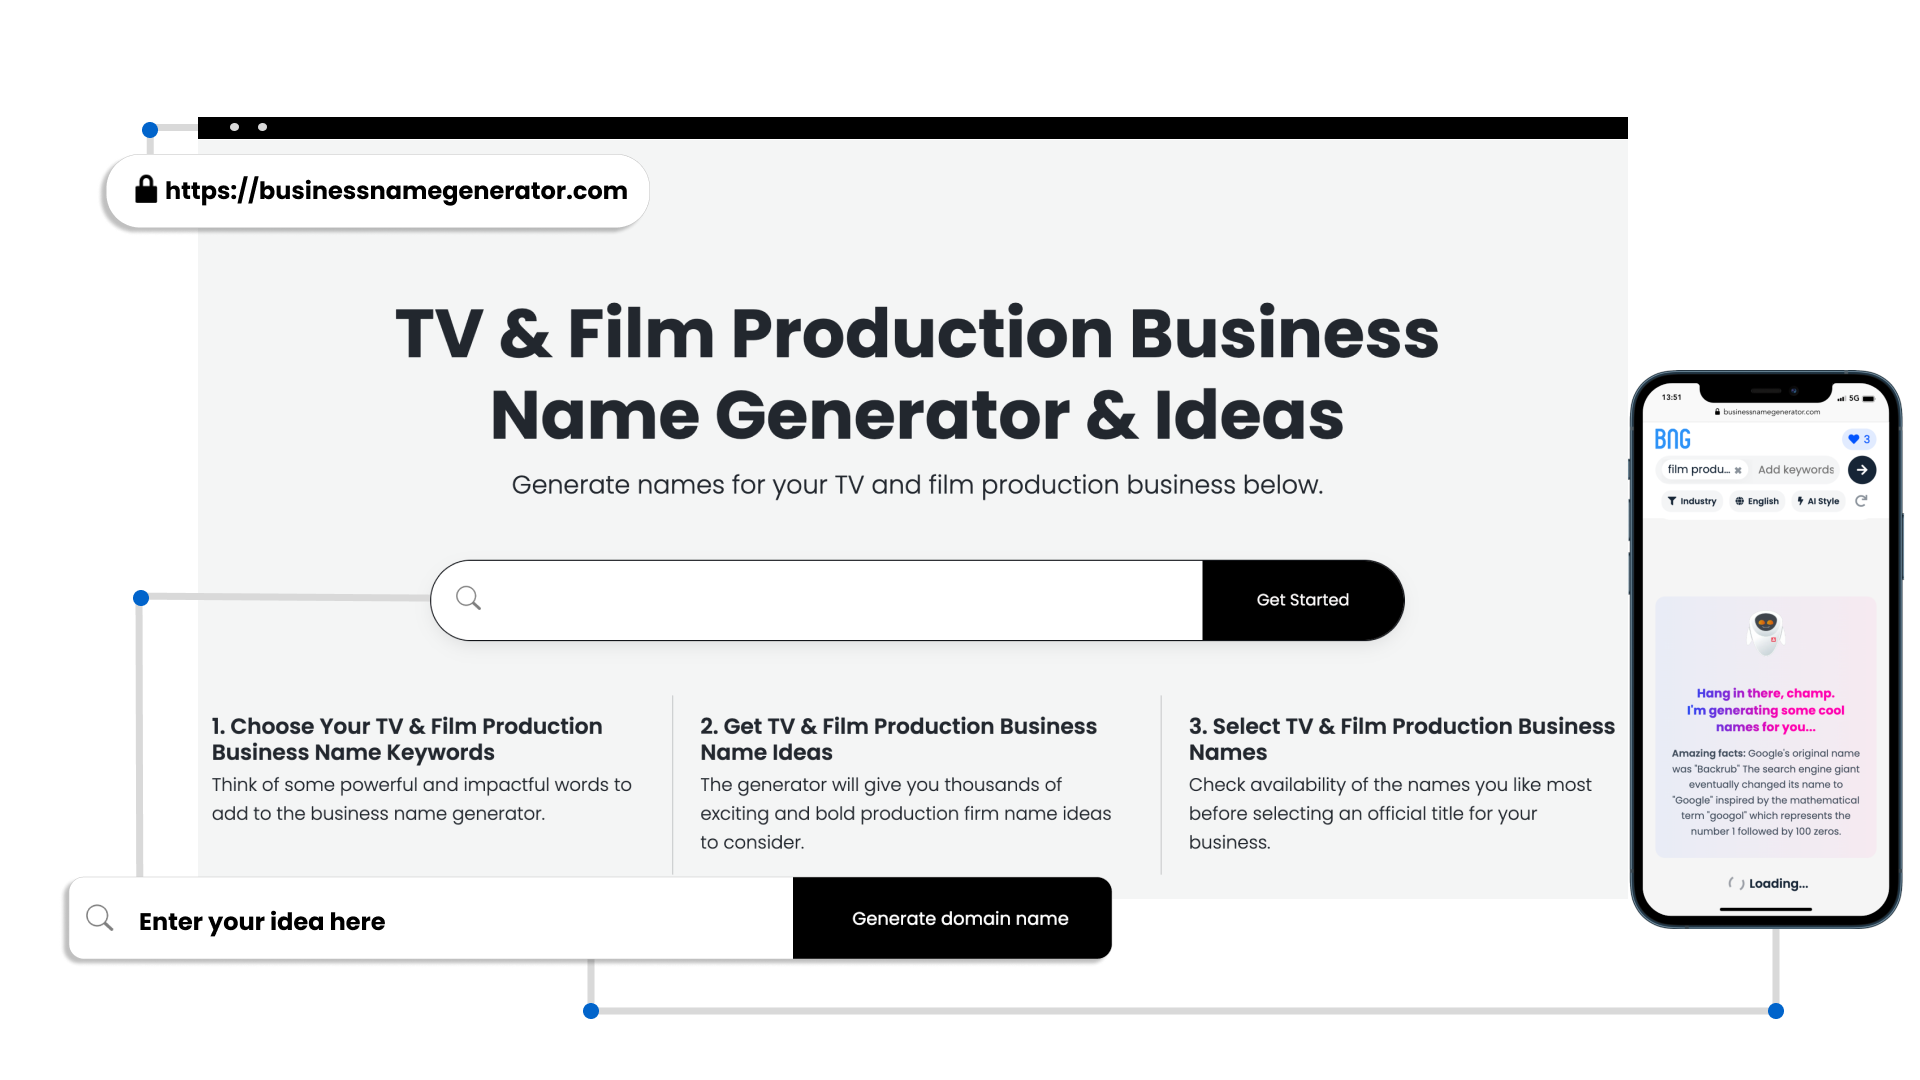 Benefits of Our TV & Film Production Company Name Generator